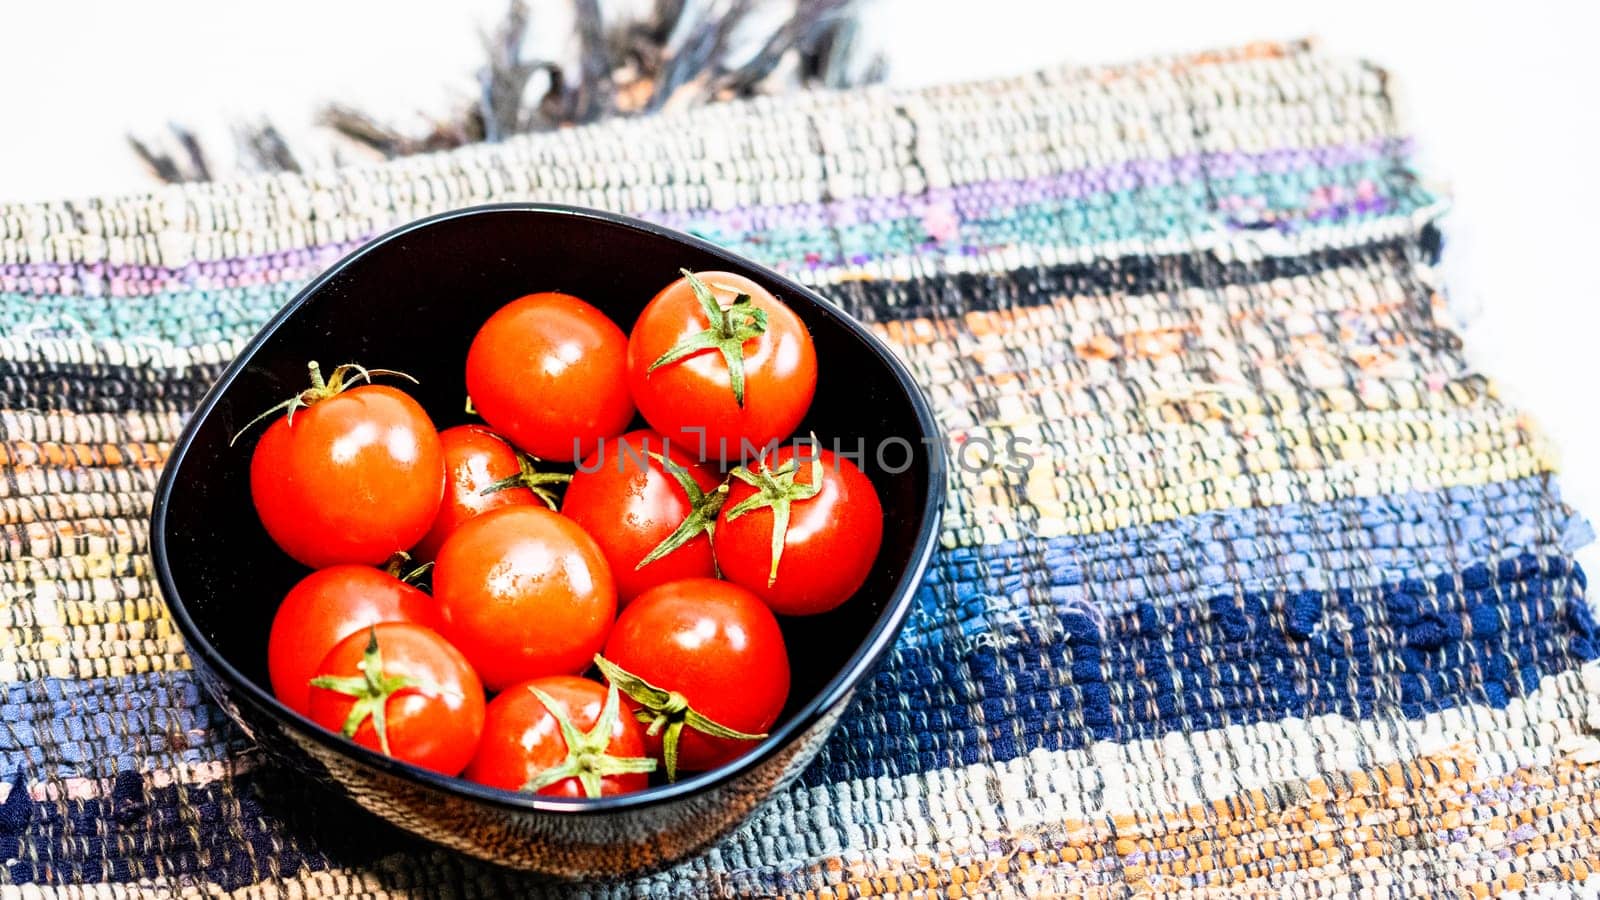 Detail of ripe cherry tomatoes in small black bowl on a rustic napkin. Ingredients and food concept by vladispas